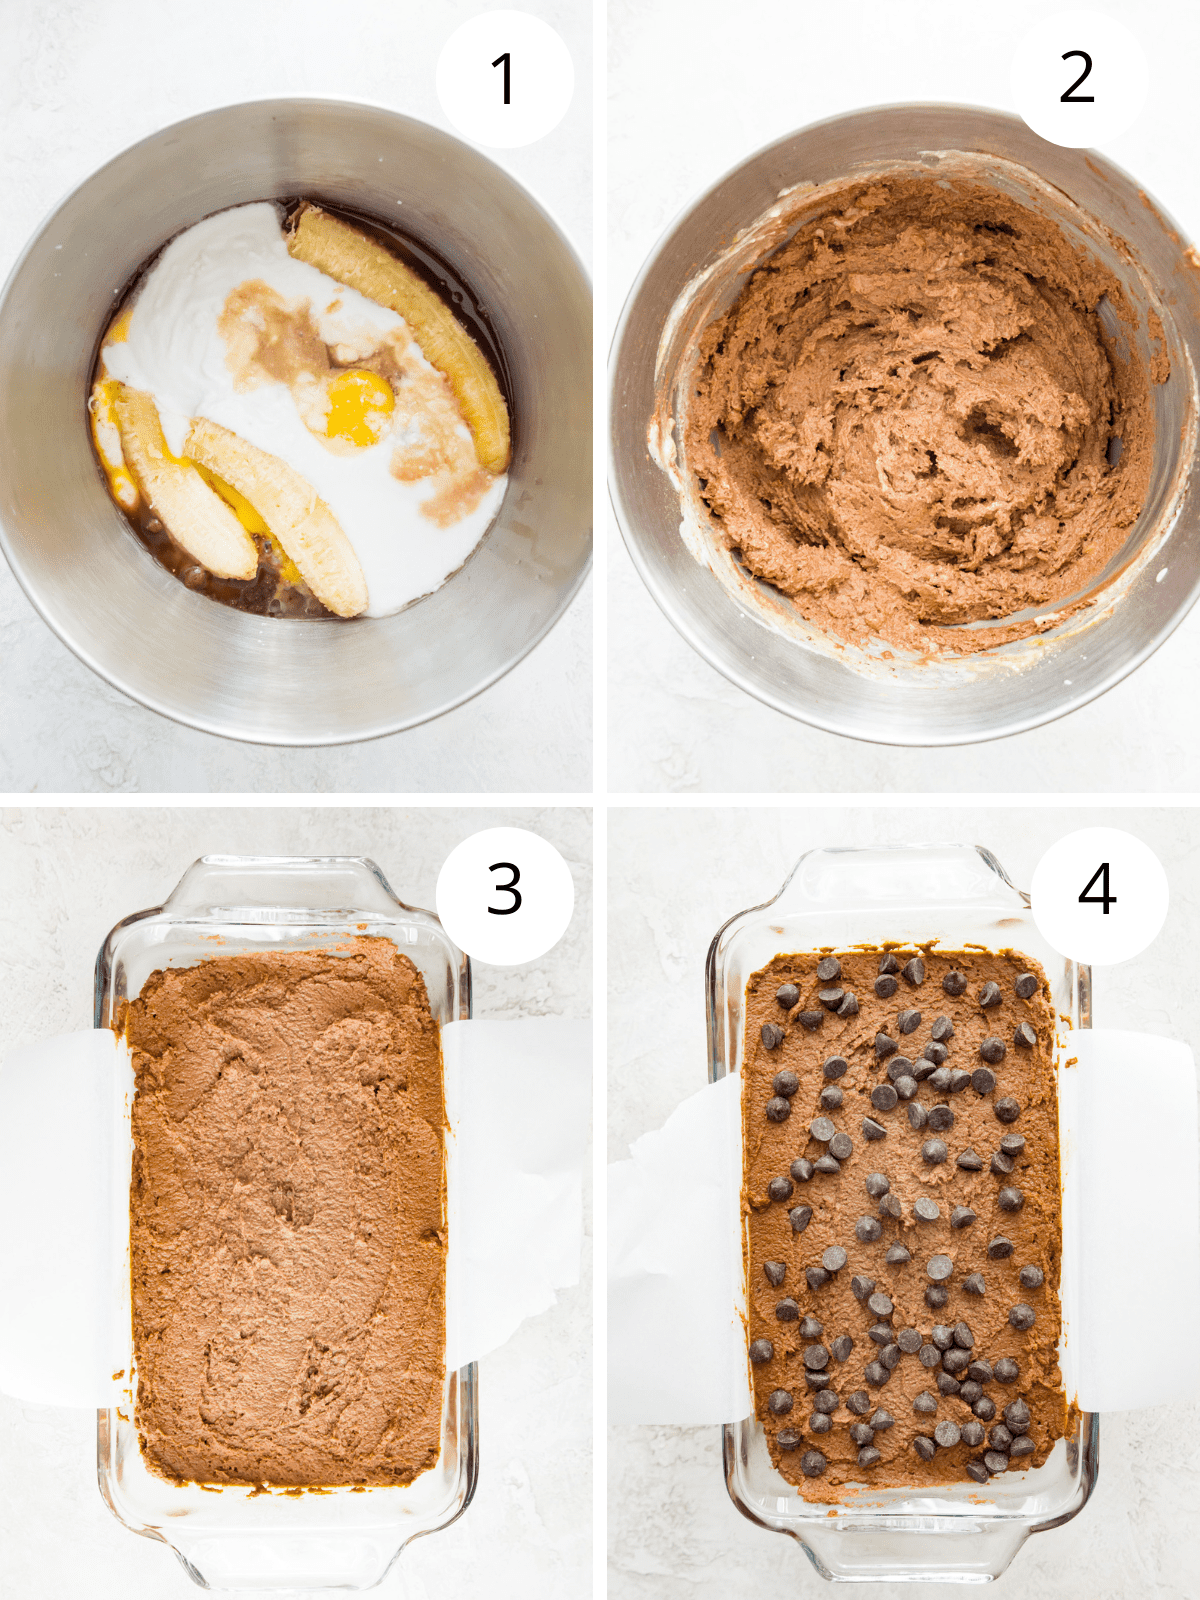 Step by step directions for making chocolate coffee banana bread.